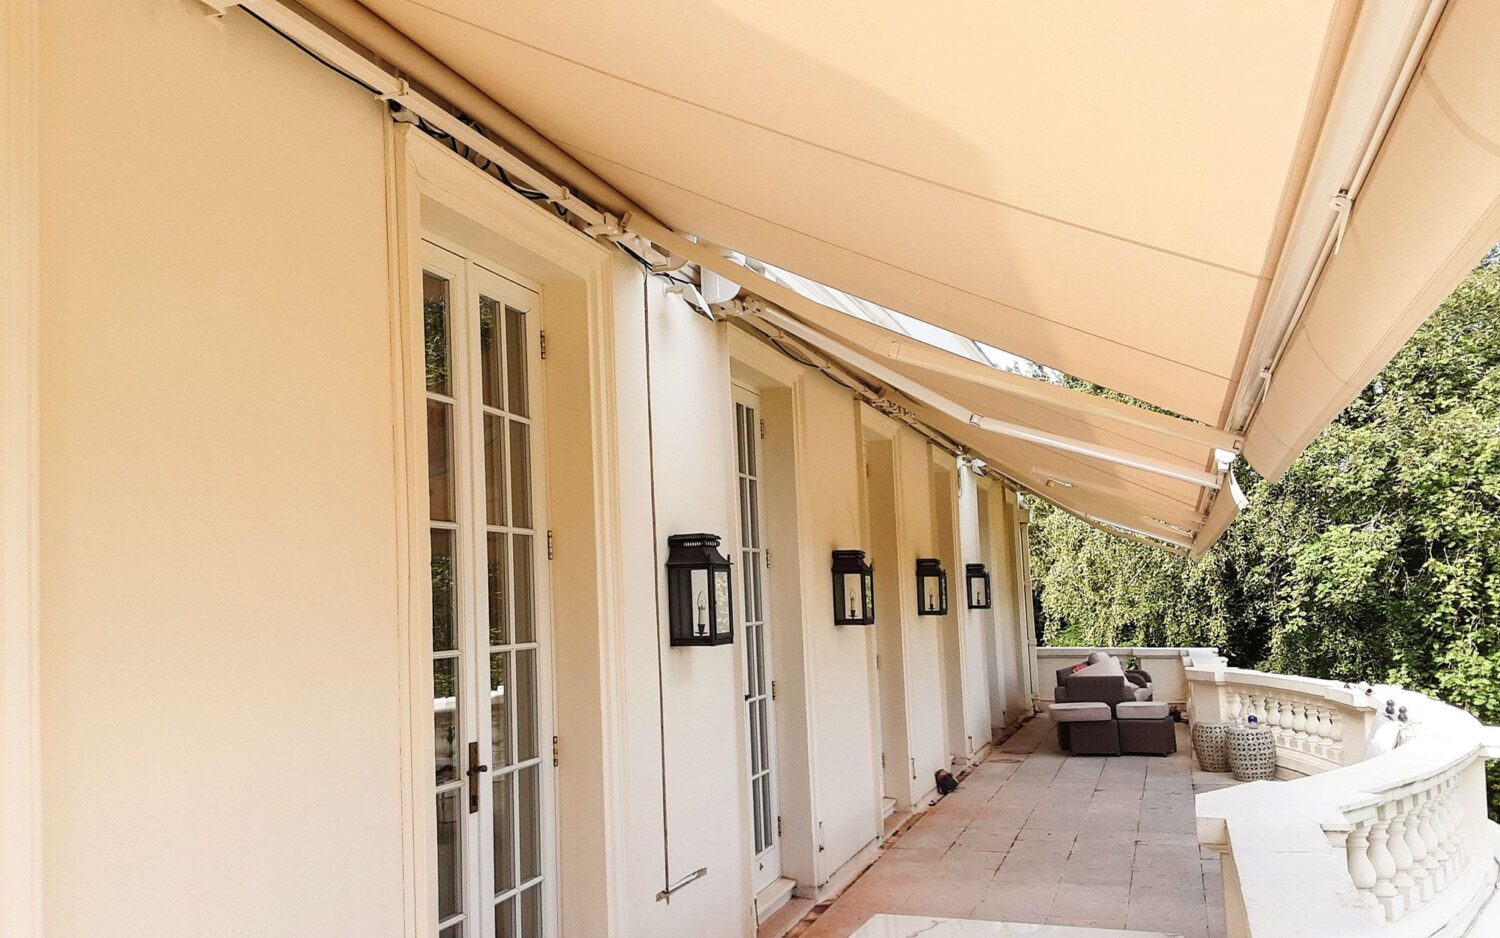 Residential awnings